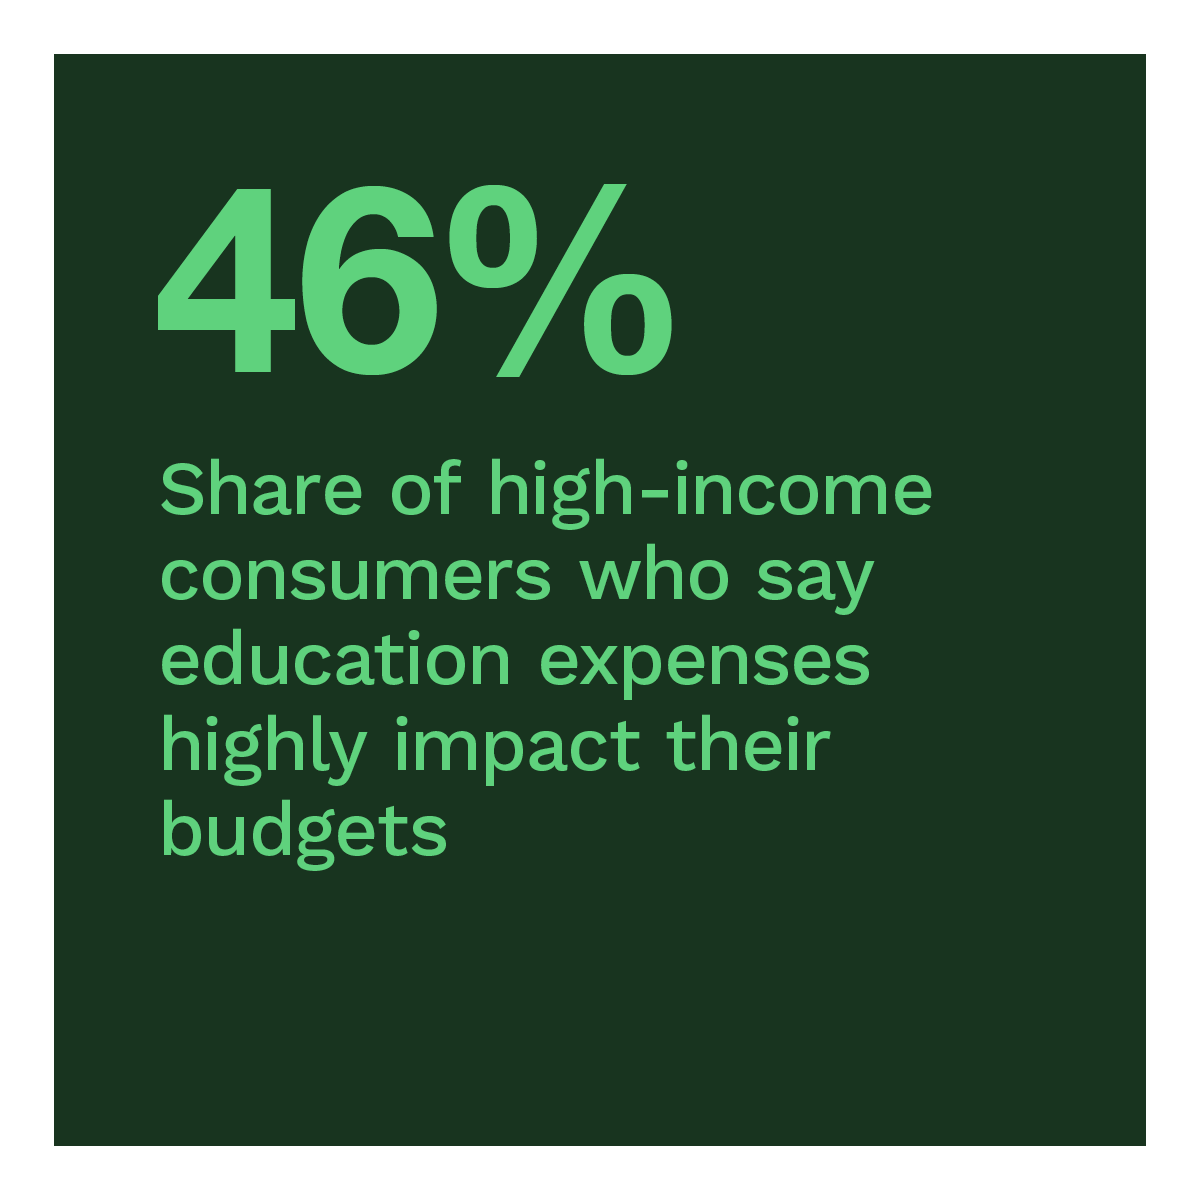  Share of high-income consumers who say education expenses highly impact their budgets